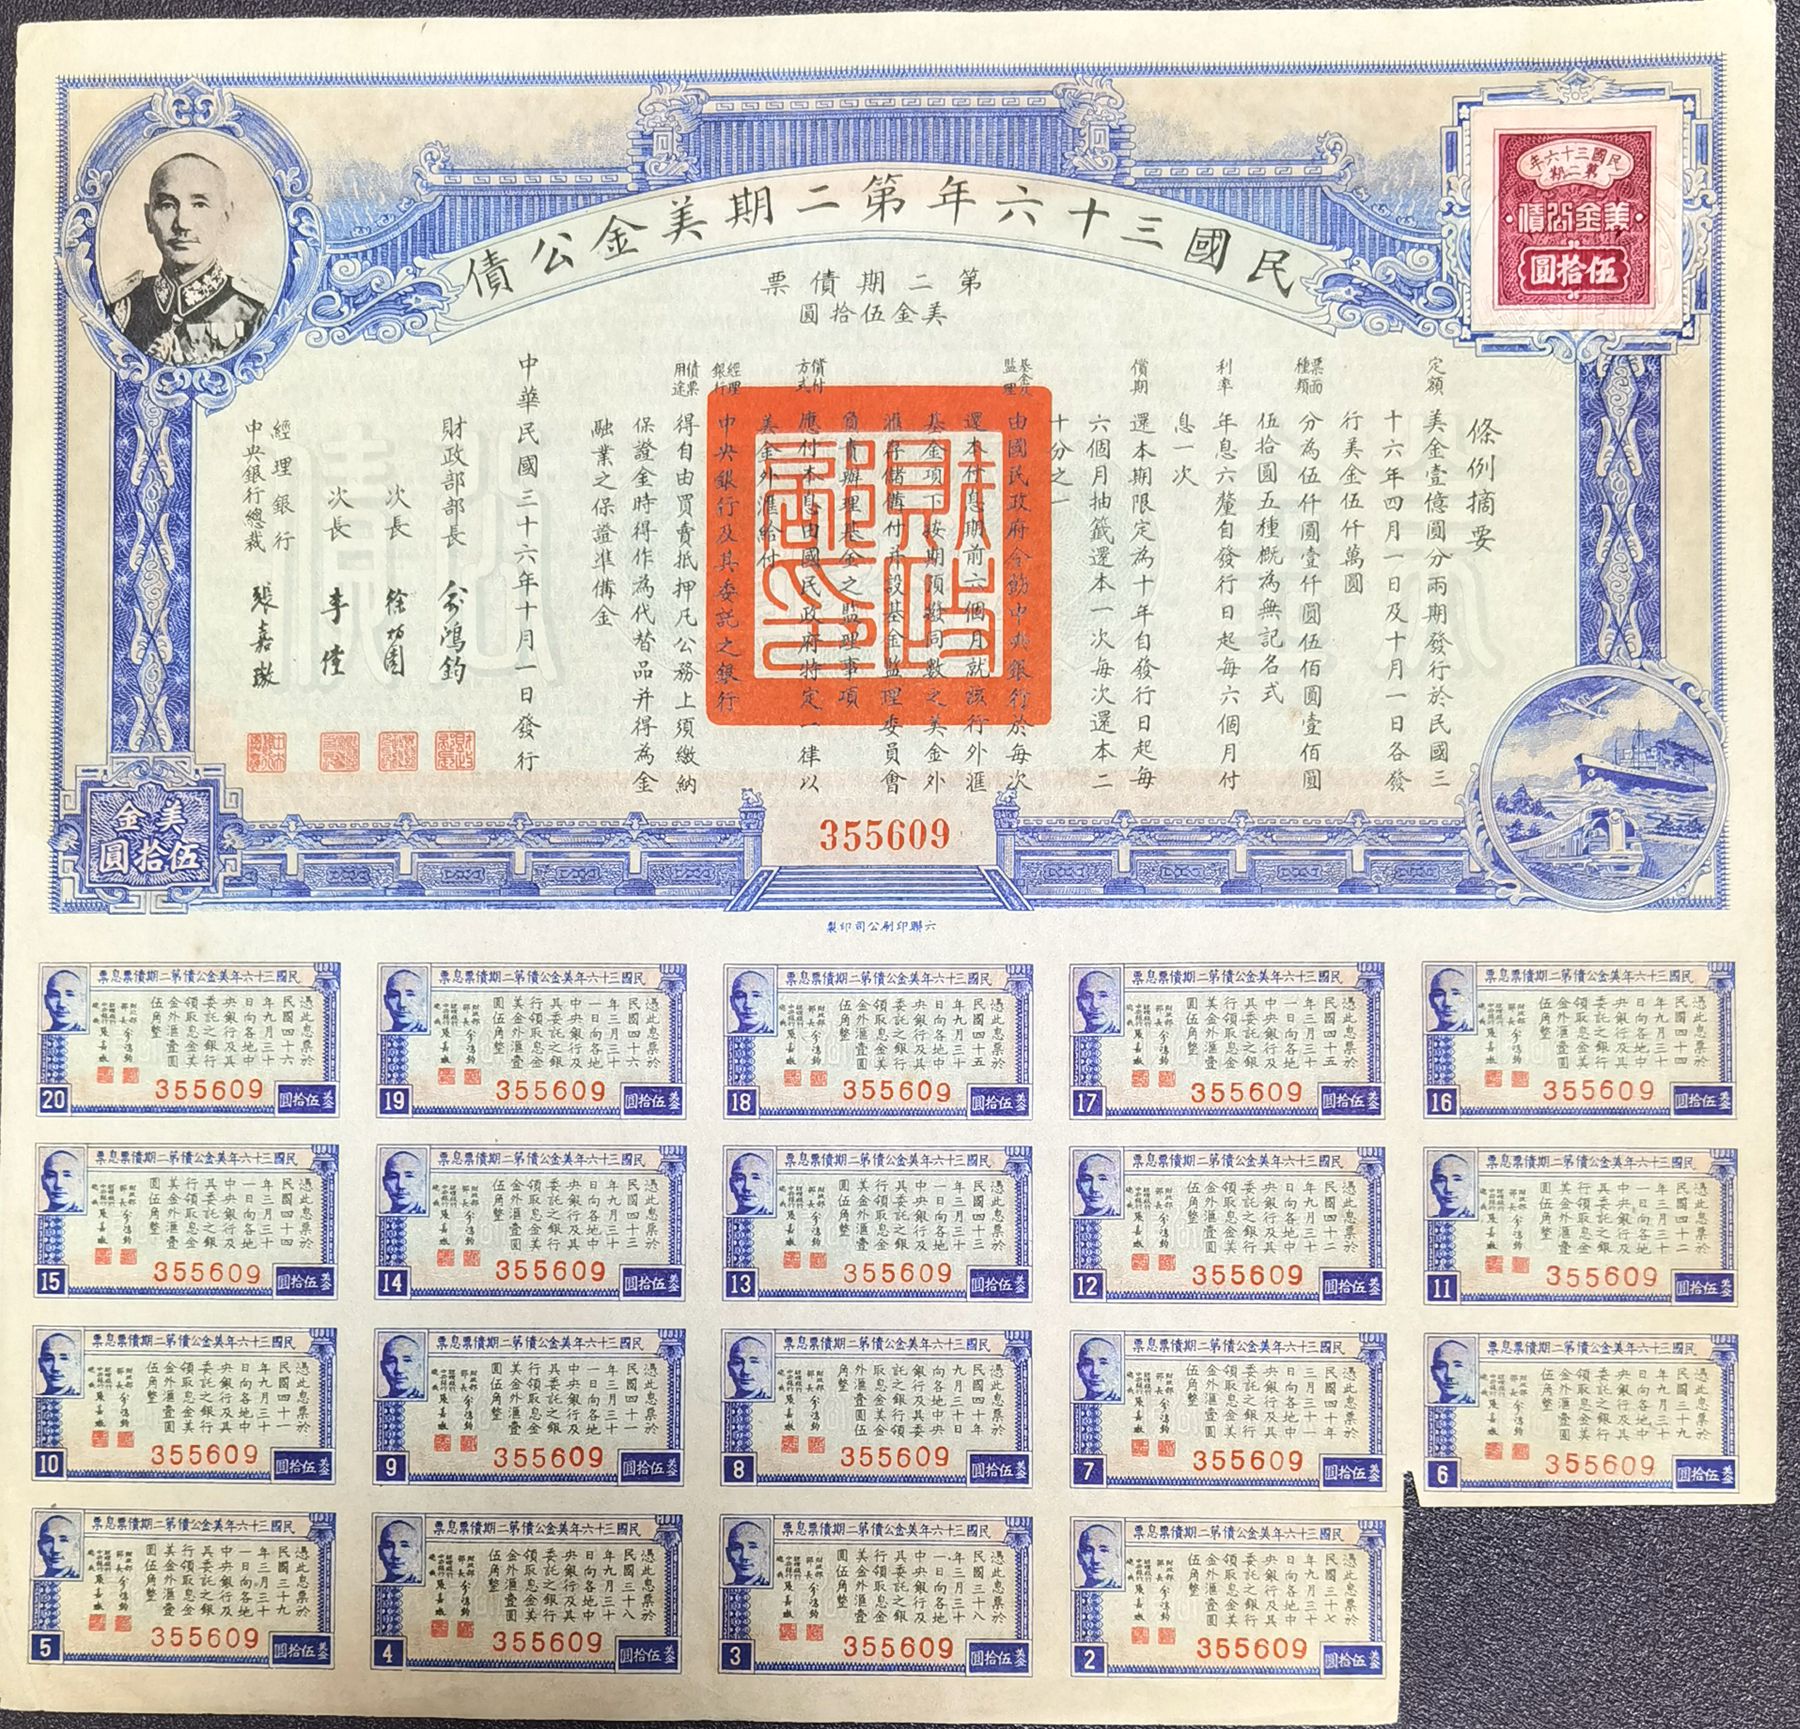 B2096, China 6% U.S.Gold Bond of 1947, USD 50 for Liberty (Second Issuing) - Click Image to Close